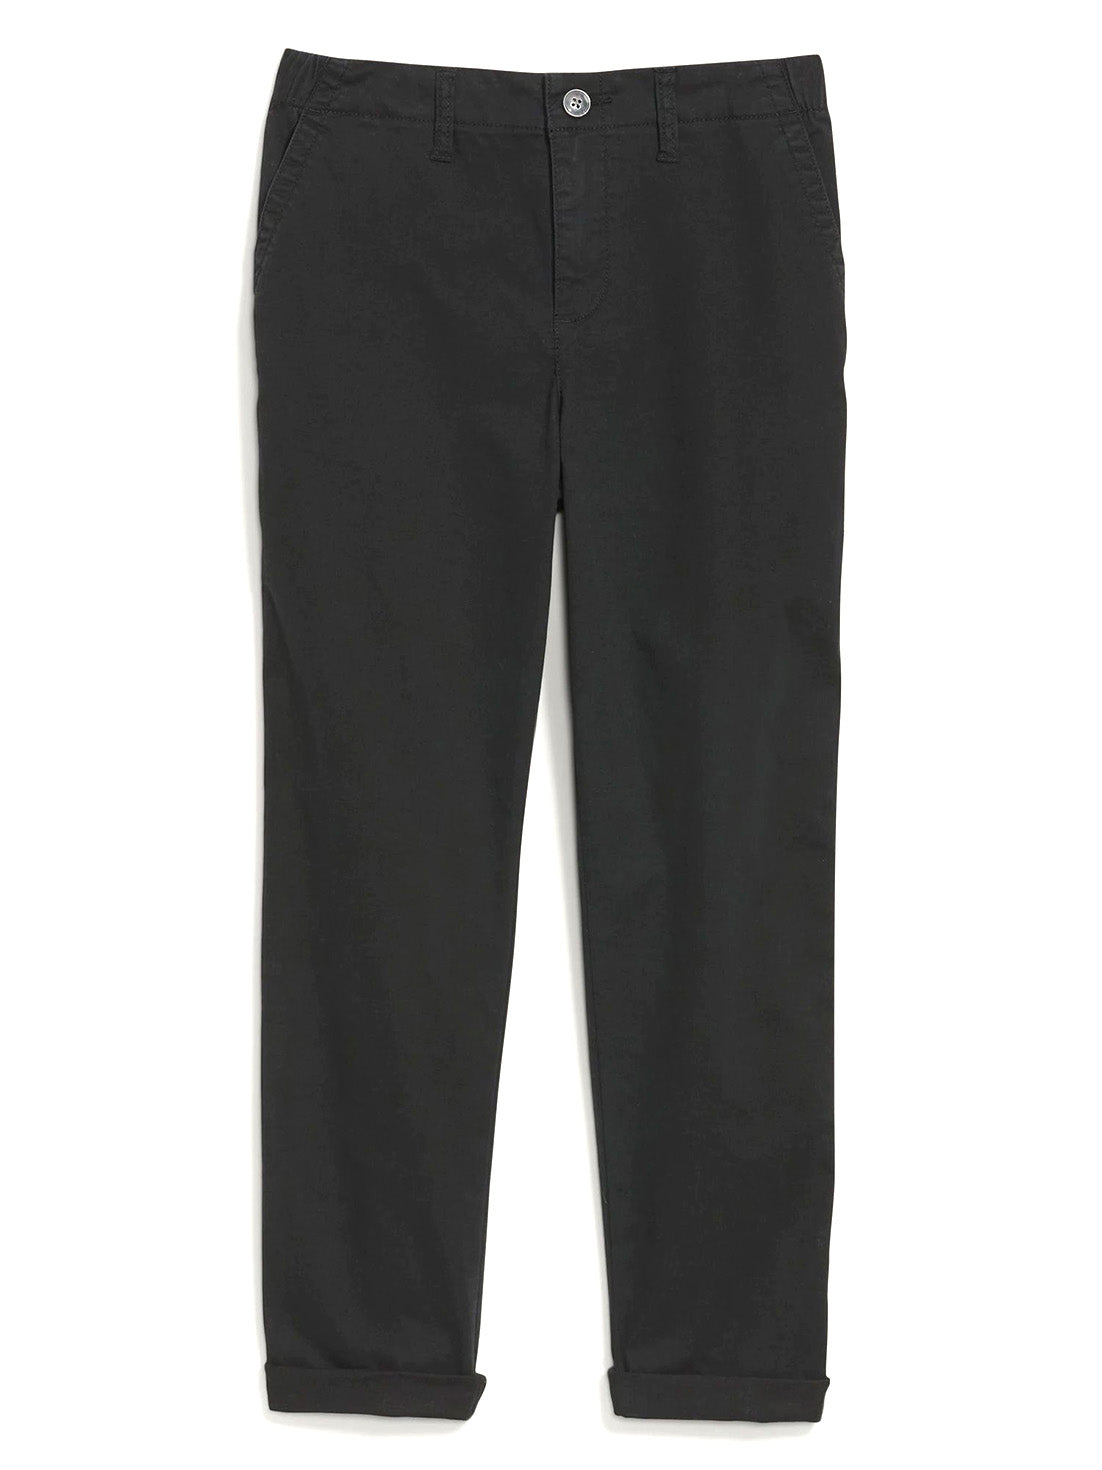 Old Navy High-Waisted OGC Chino Pants for Women Black Jack